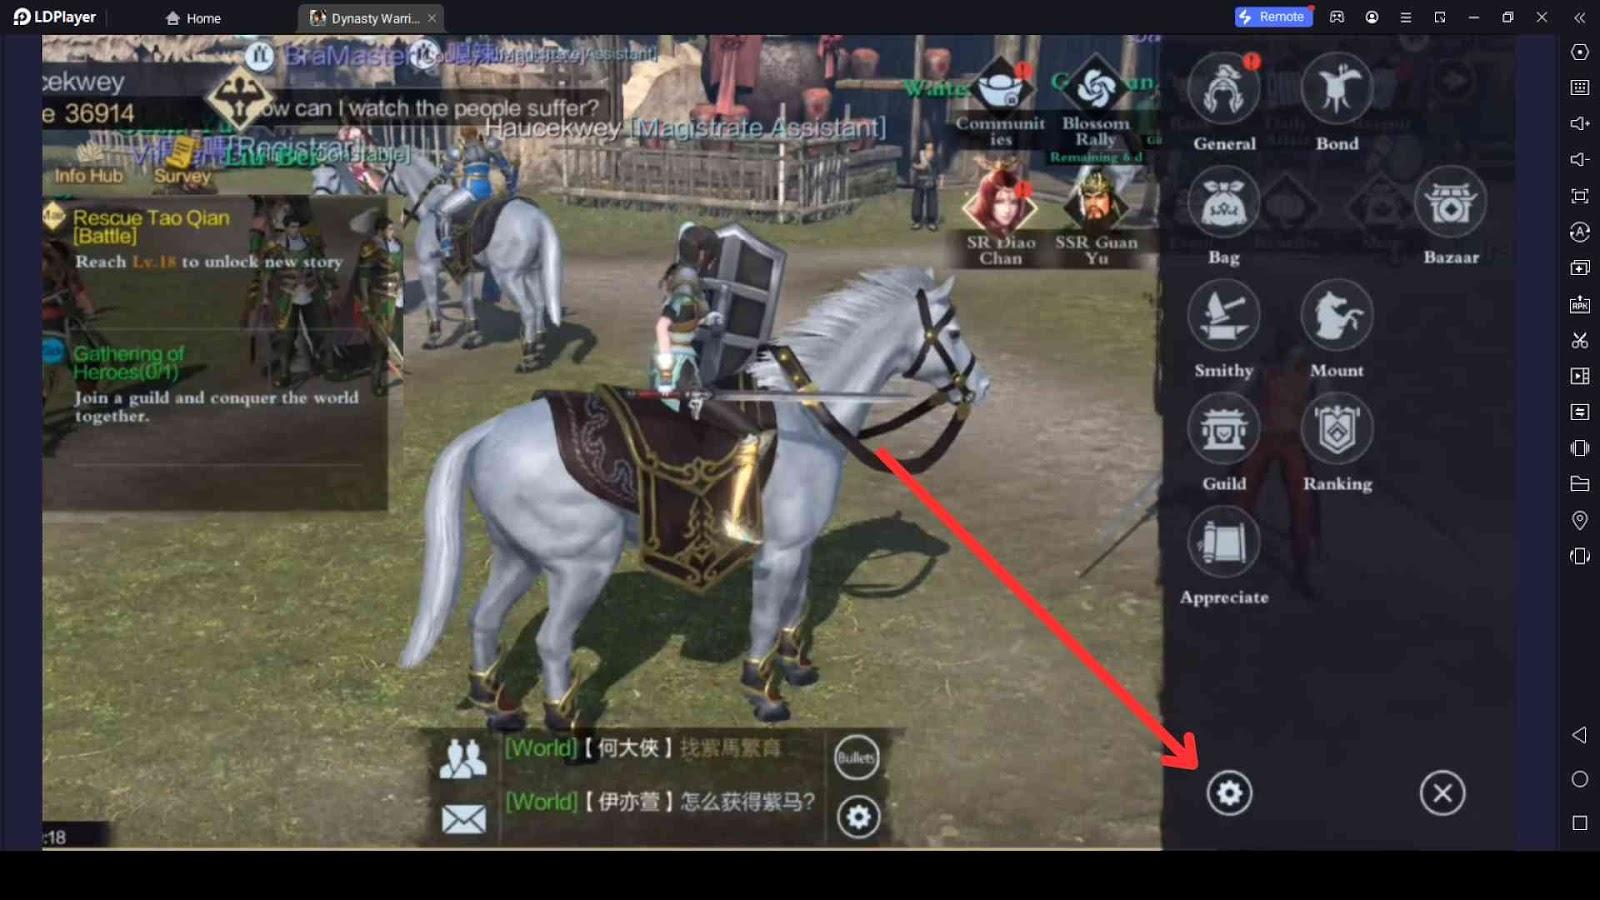 How to Claim Dynasty Warriors: Overlords Codes